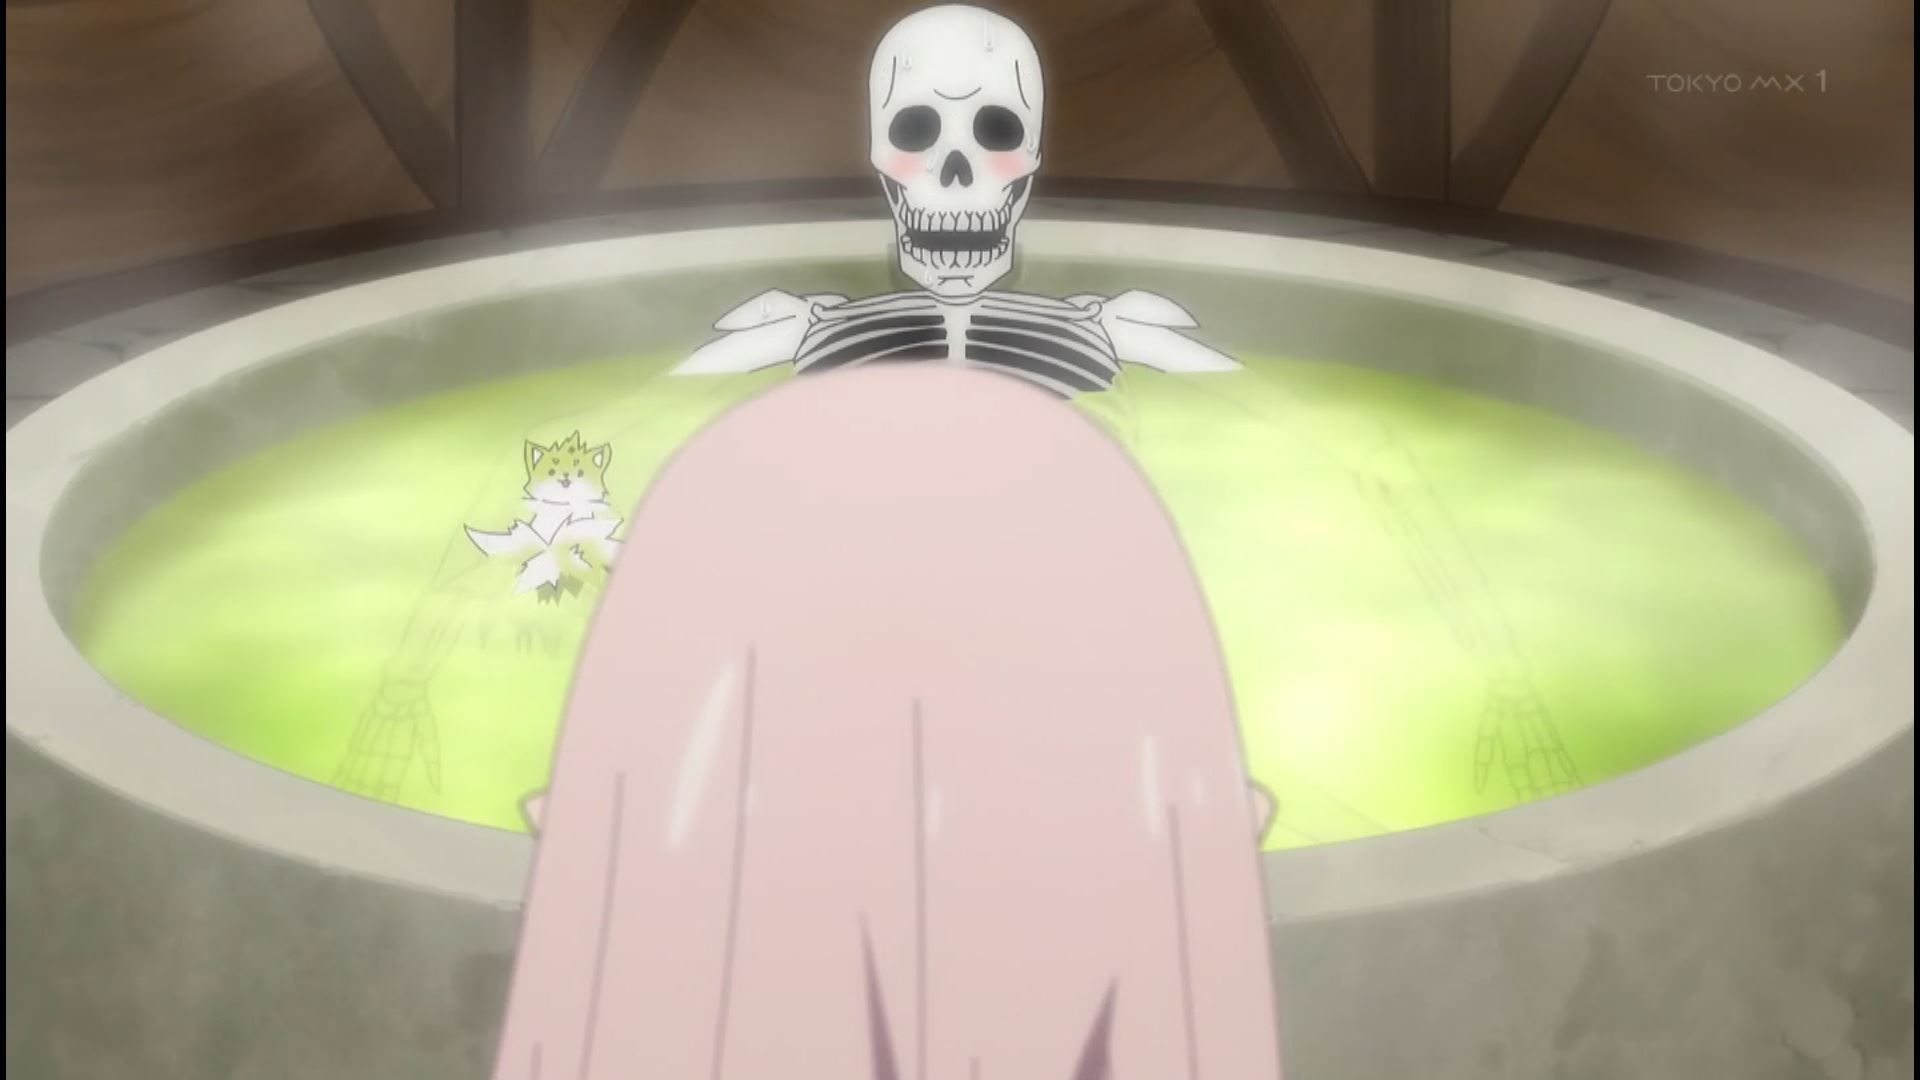 In episode 6 of the anime "Skeleton Knight, I'm Going Out to Another World" a girl takes off her clothes and looks completely naked and erotic 17